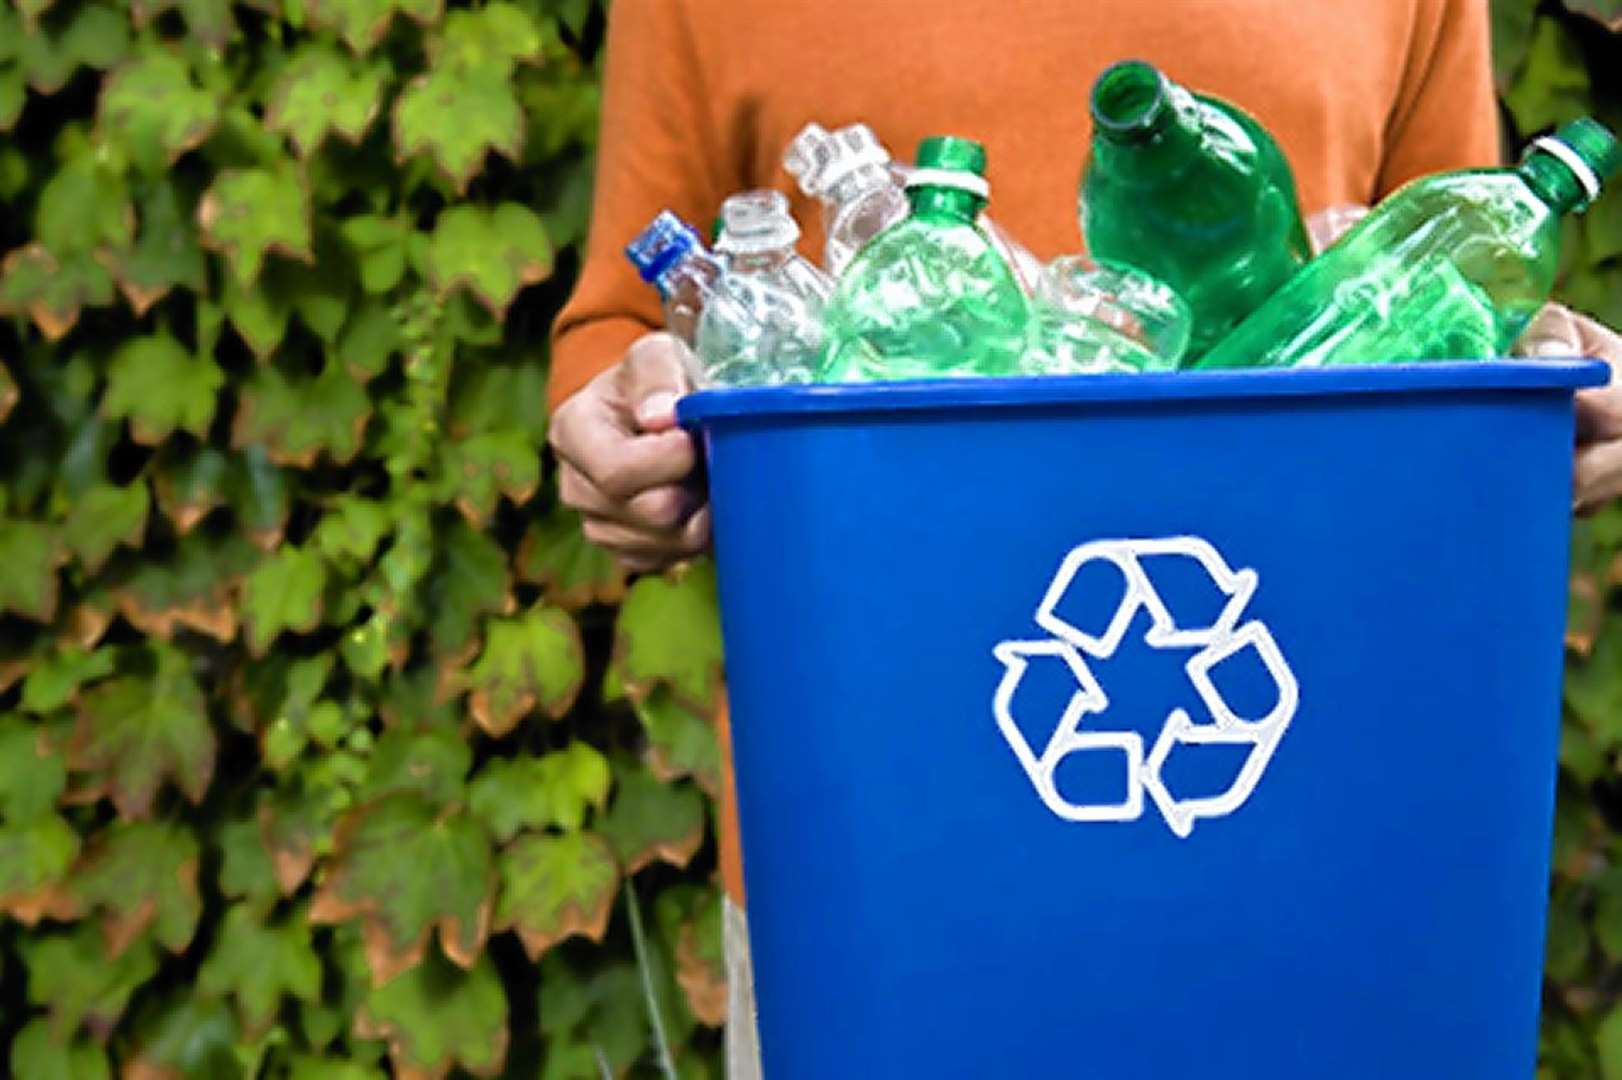 The changes to waste services will be introduced to increase the area's recycling rate.